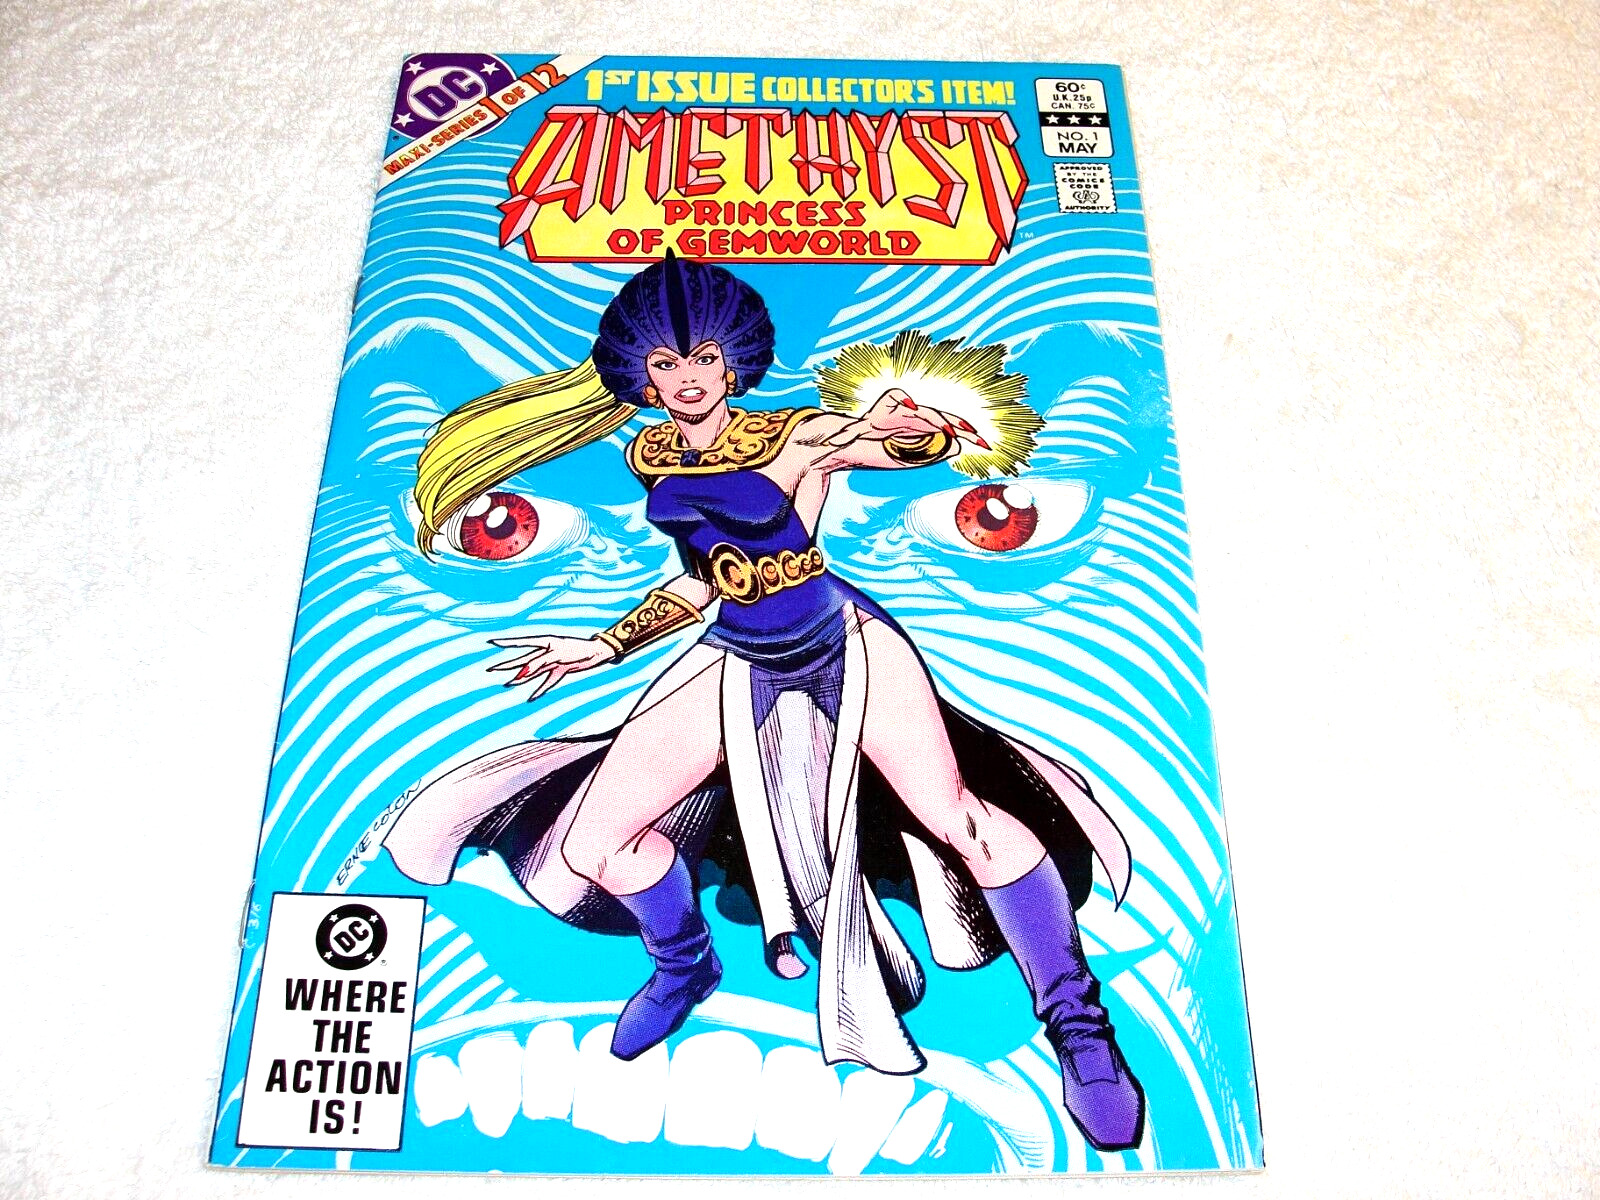 Amethyst #1 (of a 12-Issue Maxi-Series),  (May 1983, DC Comics), 7.0-8.0 VF-